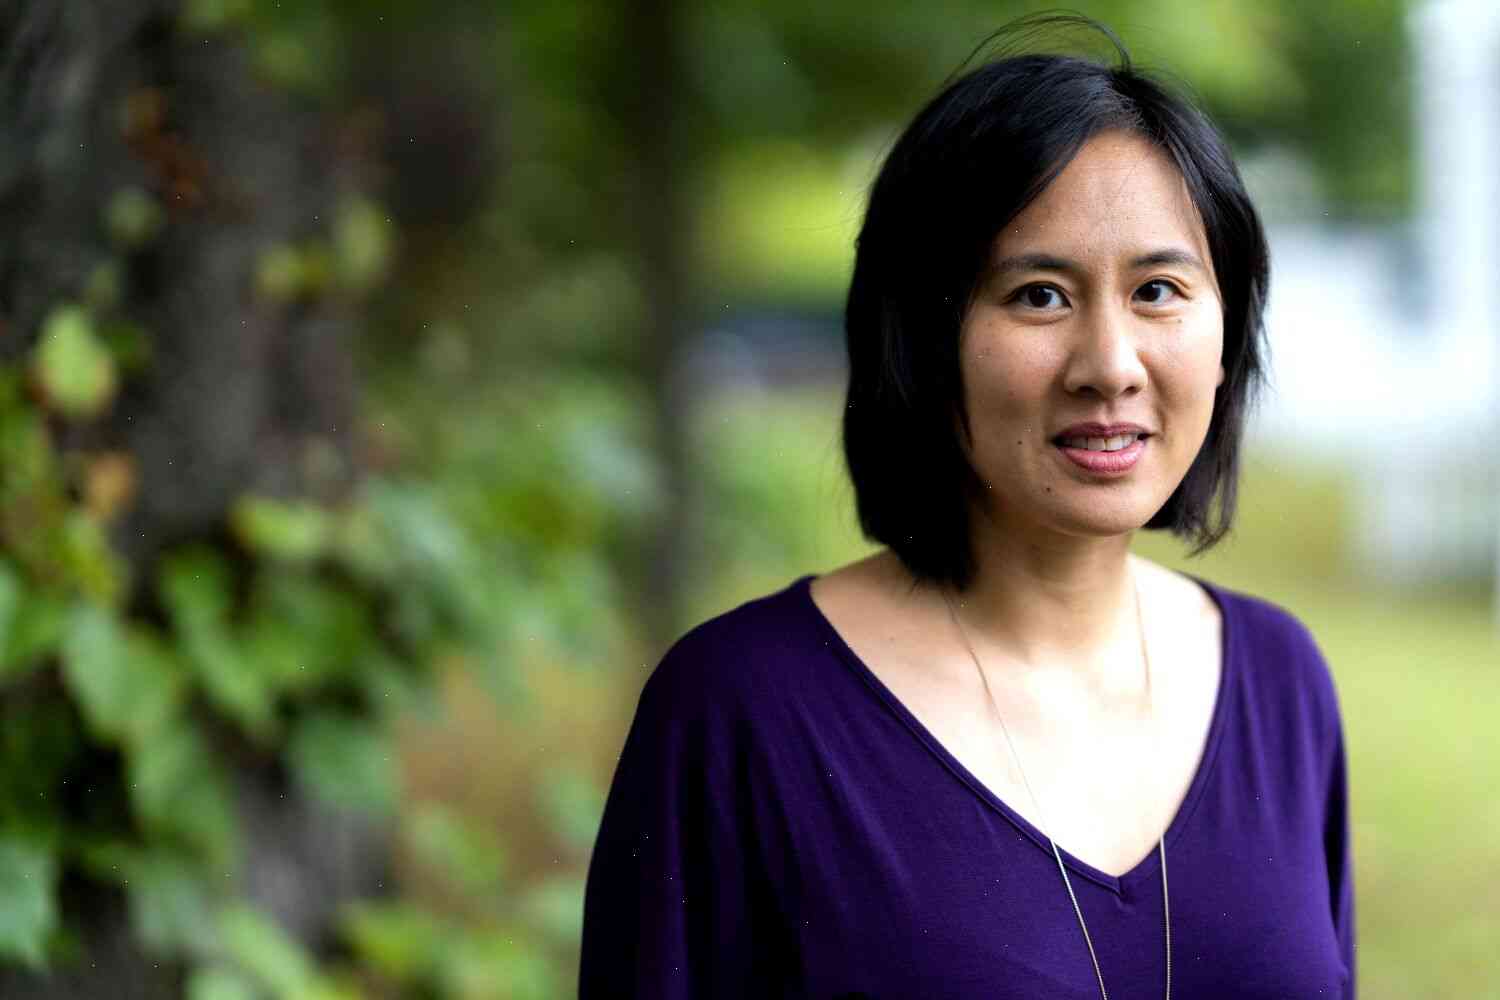 Celeste Ng is a writer on the rise